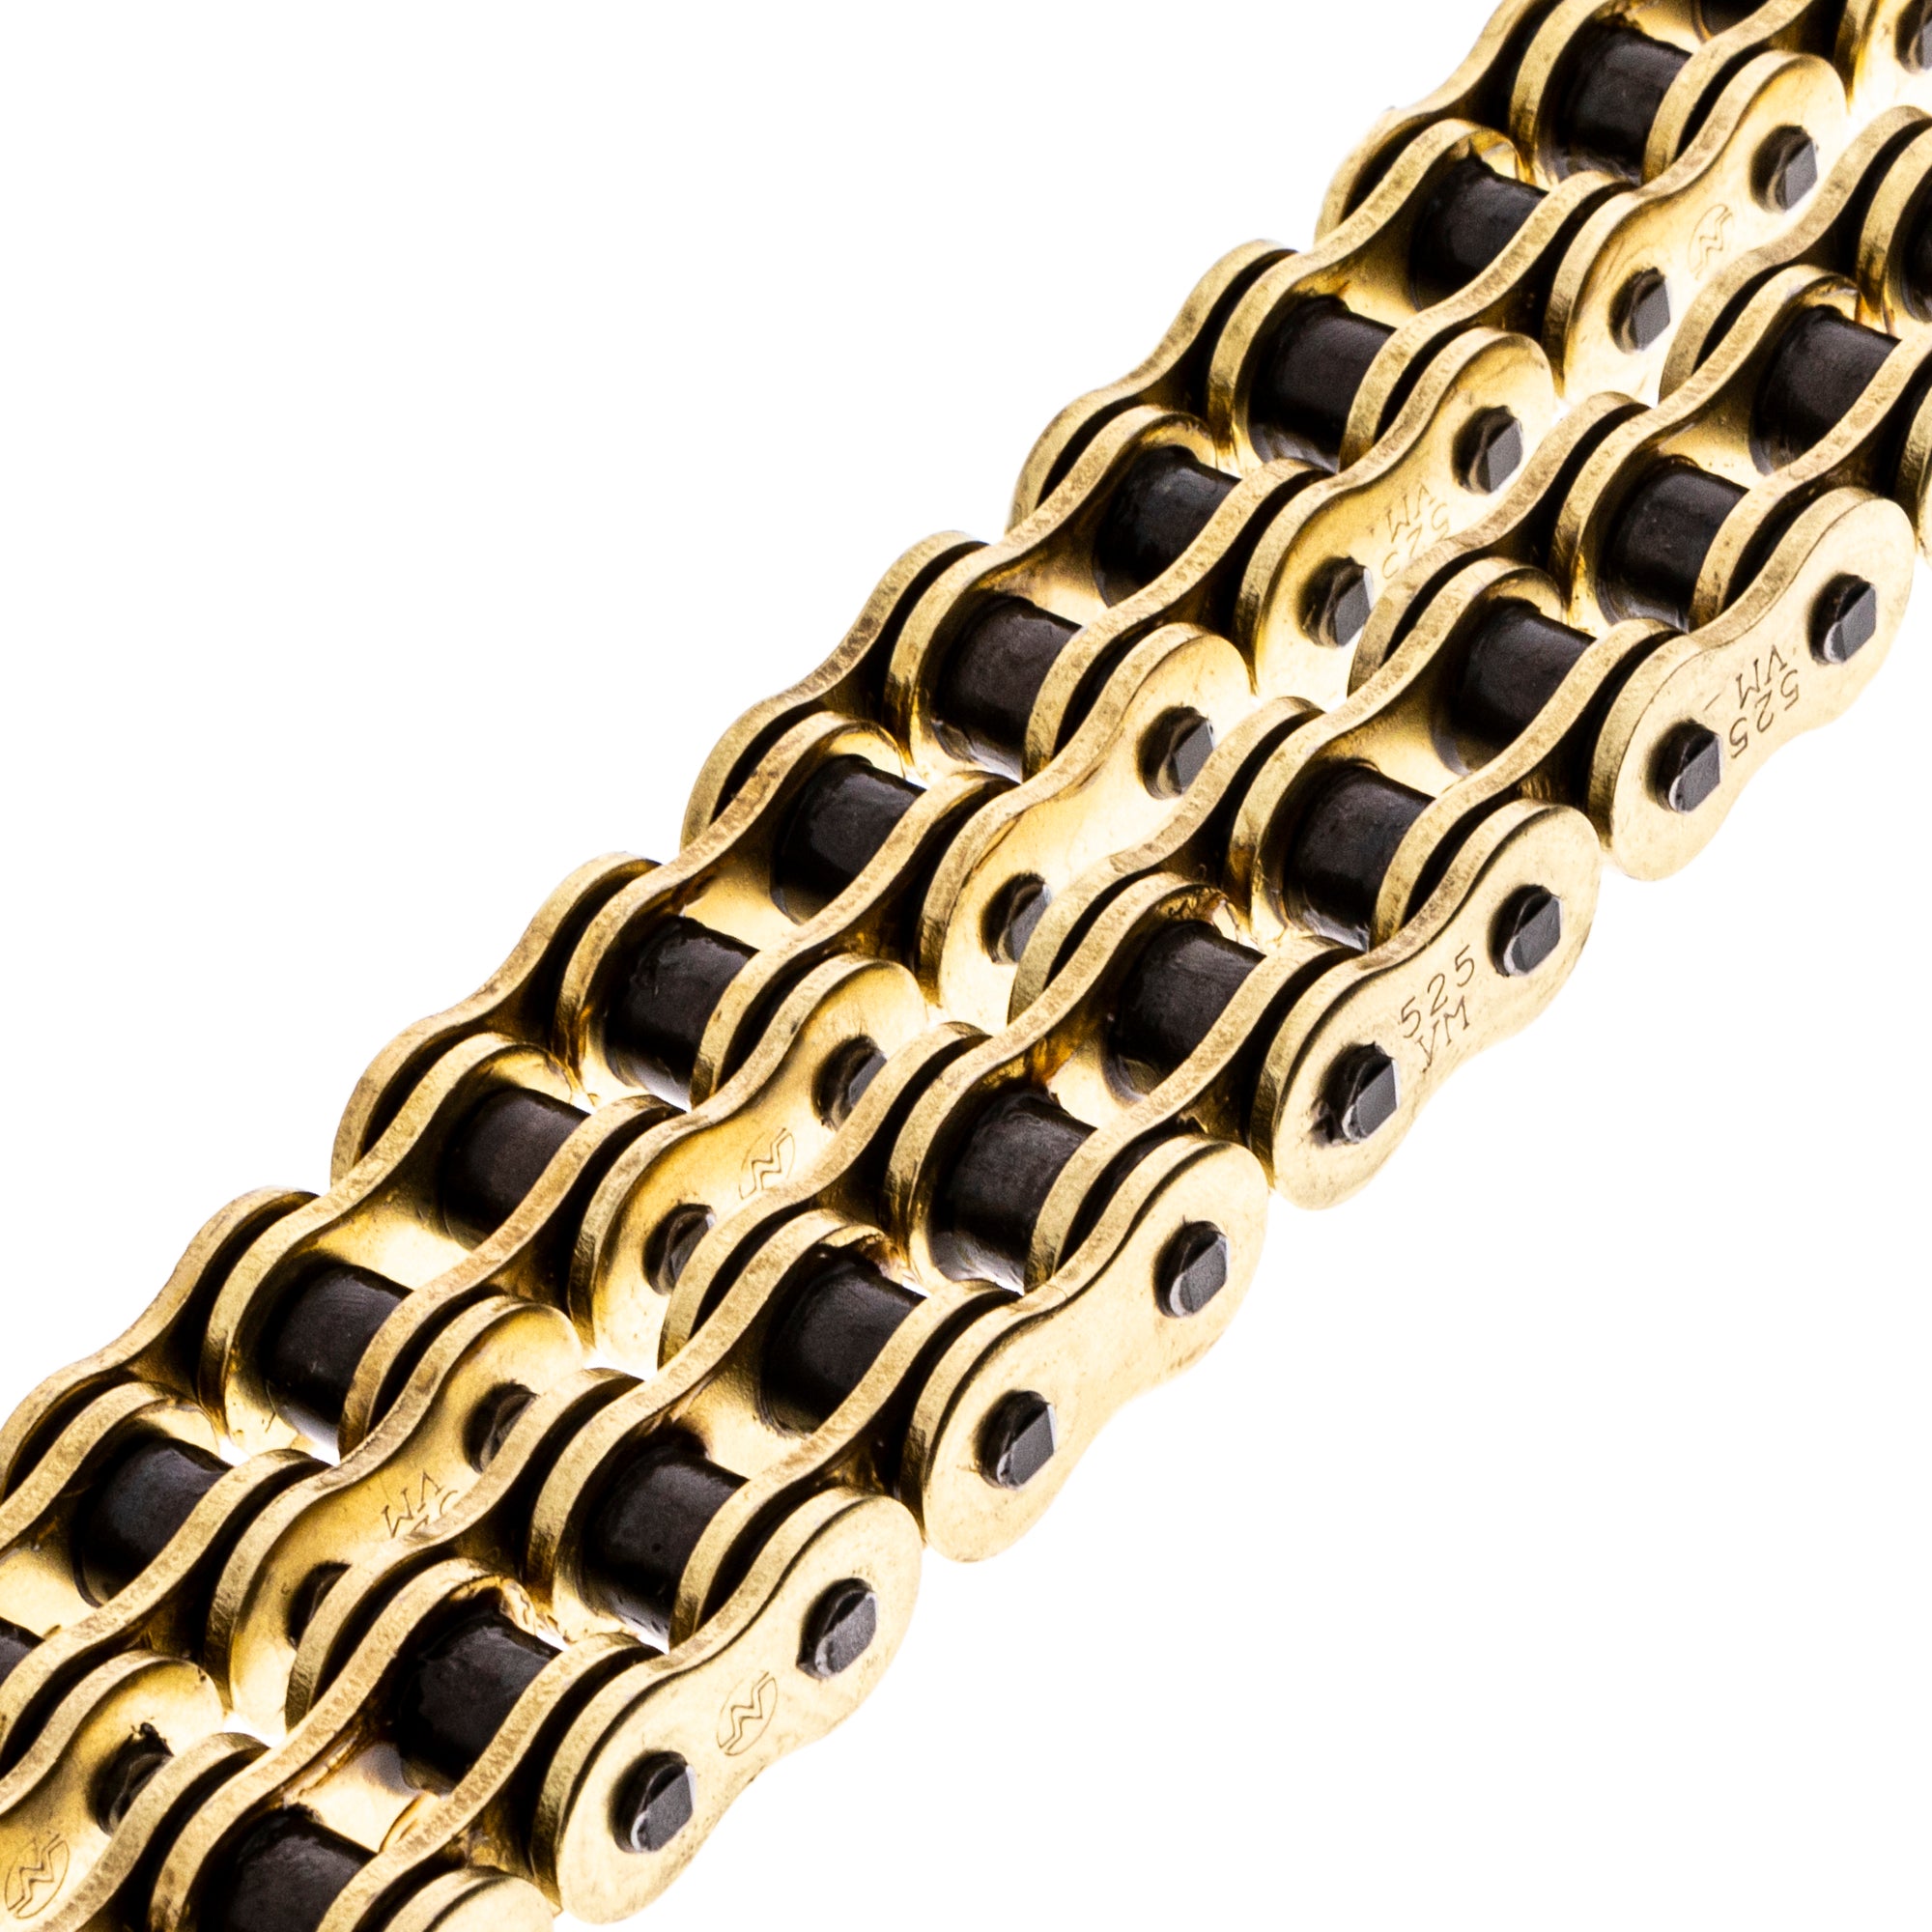 Gold X-Ring Chain 122 w/ Master Link for zOTHER Yamaha Triumph Tiger Shadow FZ8 T2015075 NICHE 519-CDC2540H